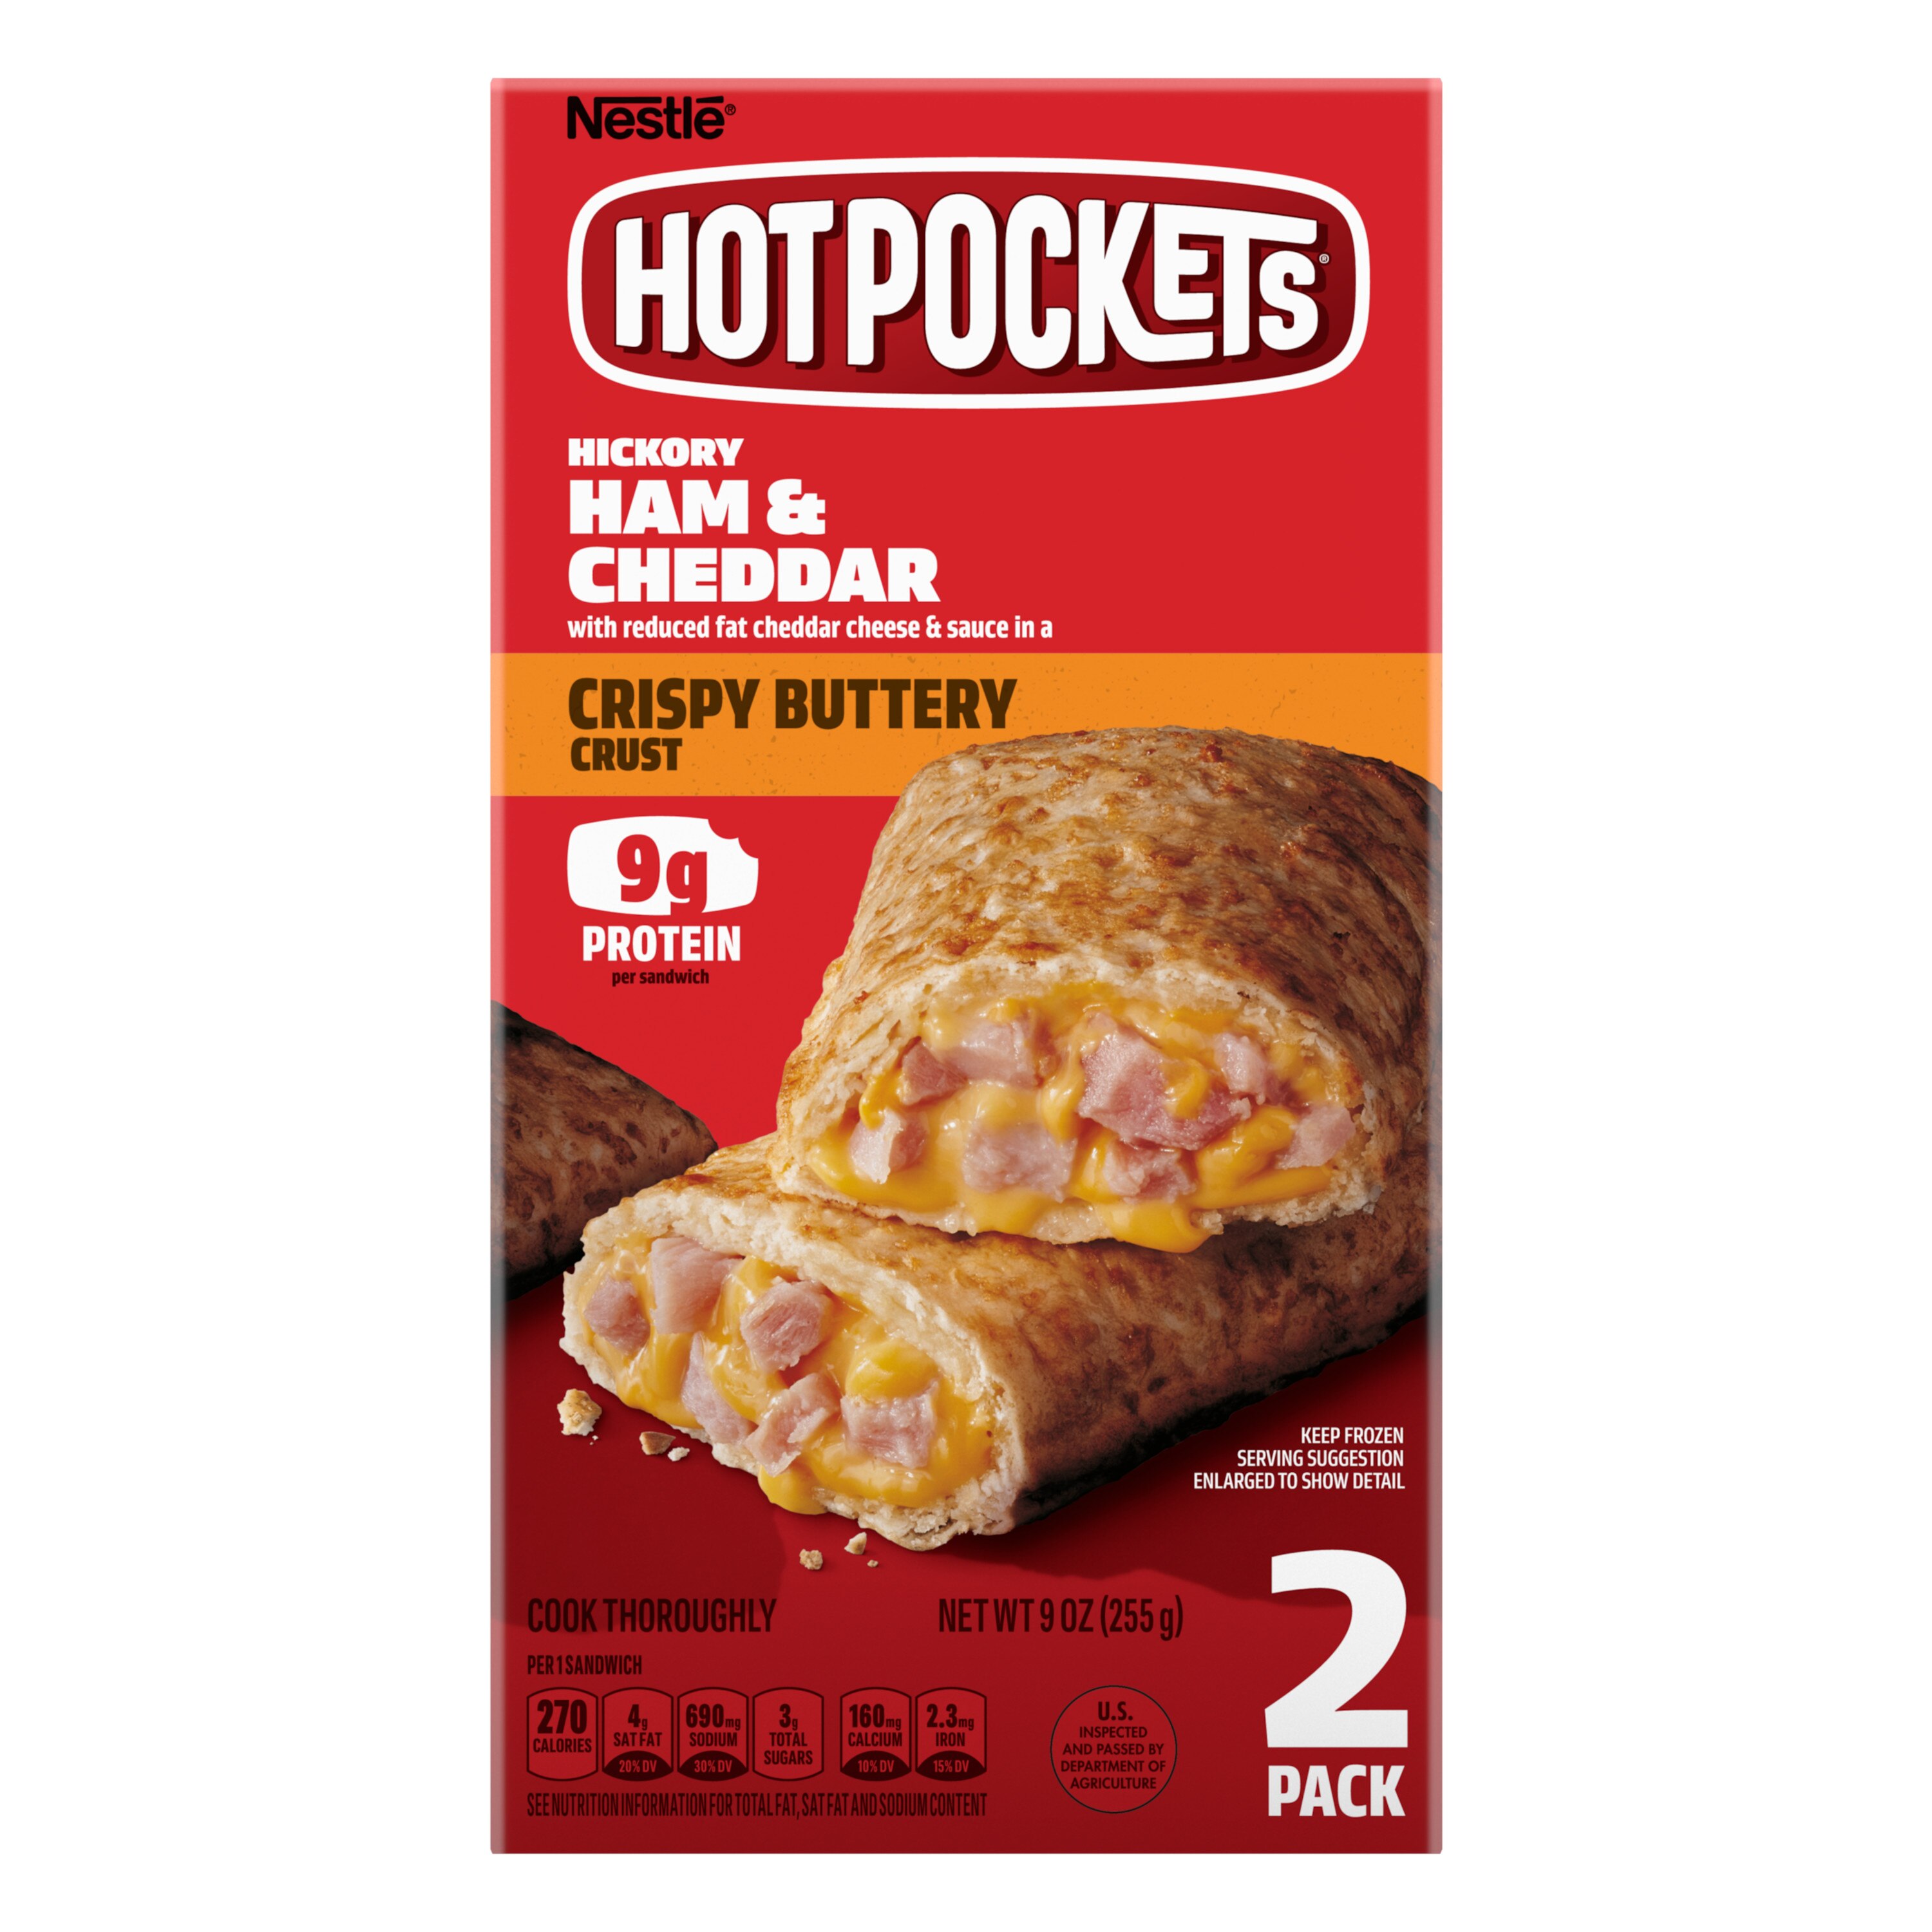 Hot Pockets Hickory Ham and Cheddar Frozen Snacks in a Crispy Buttery Crust, Frozen Snacks Made with Reduced Fat Cheddar Cheese, 9 Oz, 2 Count Frozen Sandwiches